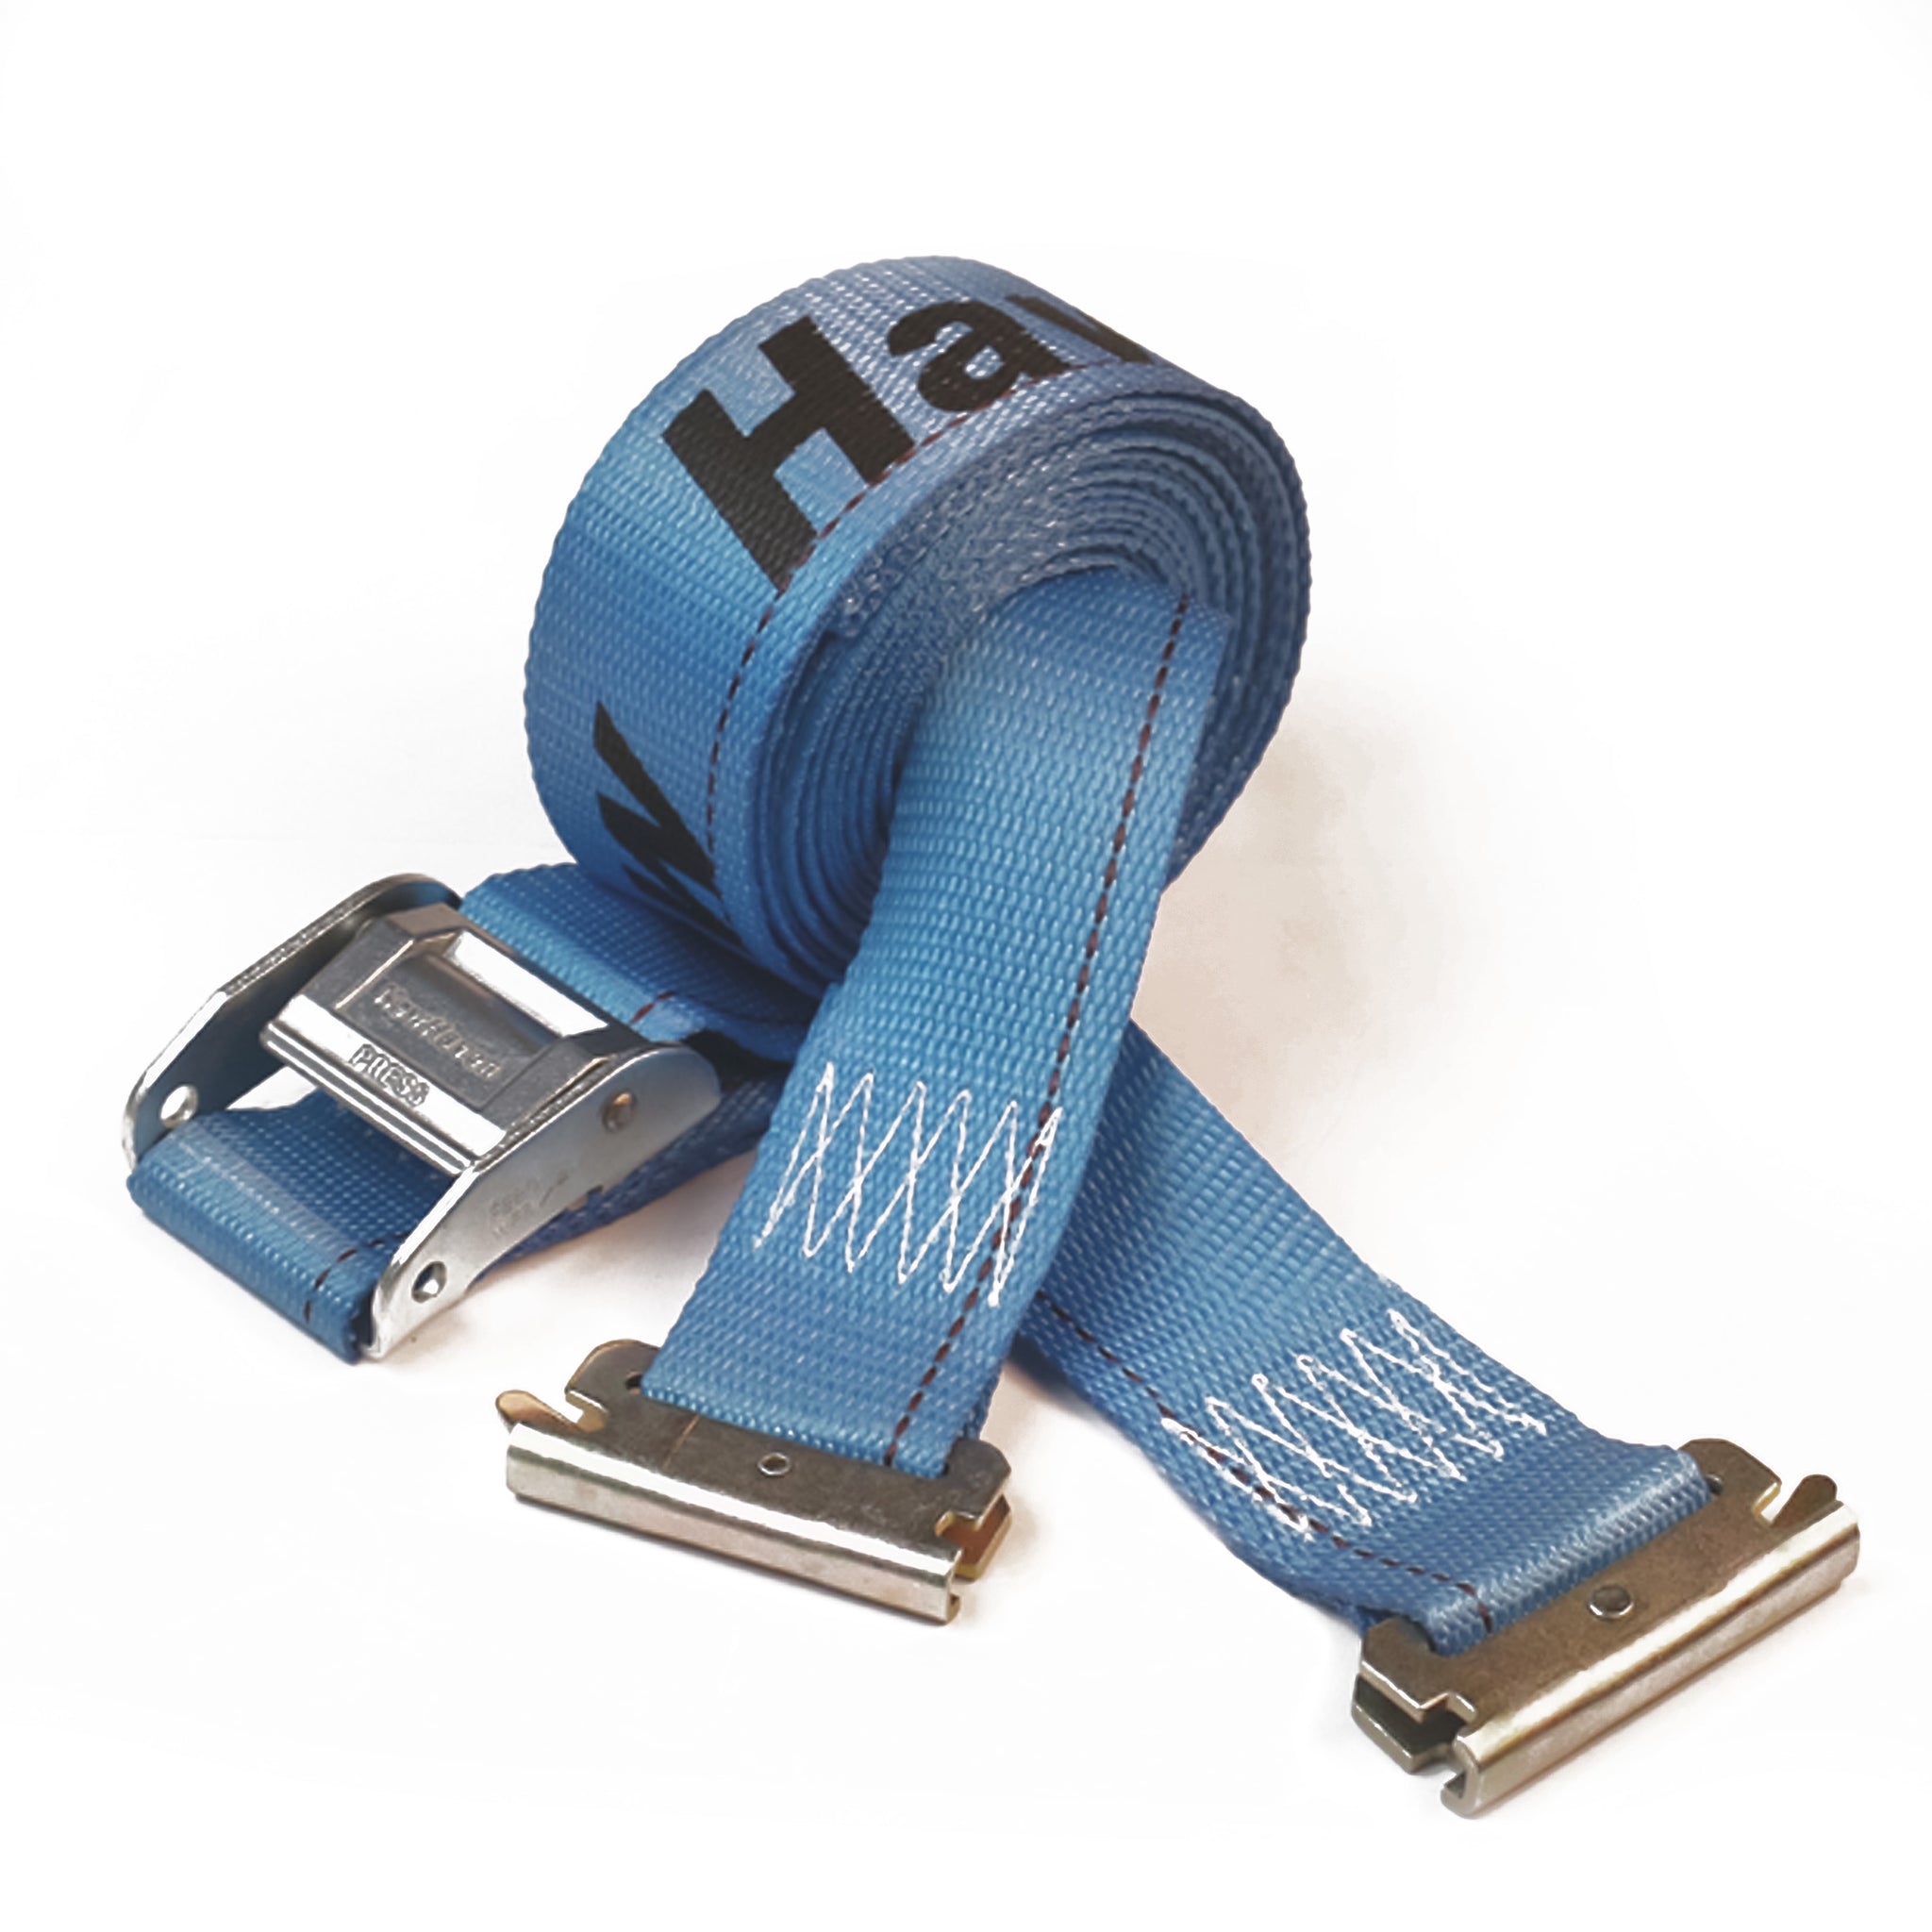 2 x 20' Blue E-Track Cam Buckle Strap w/ Double-Fitted End